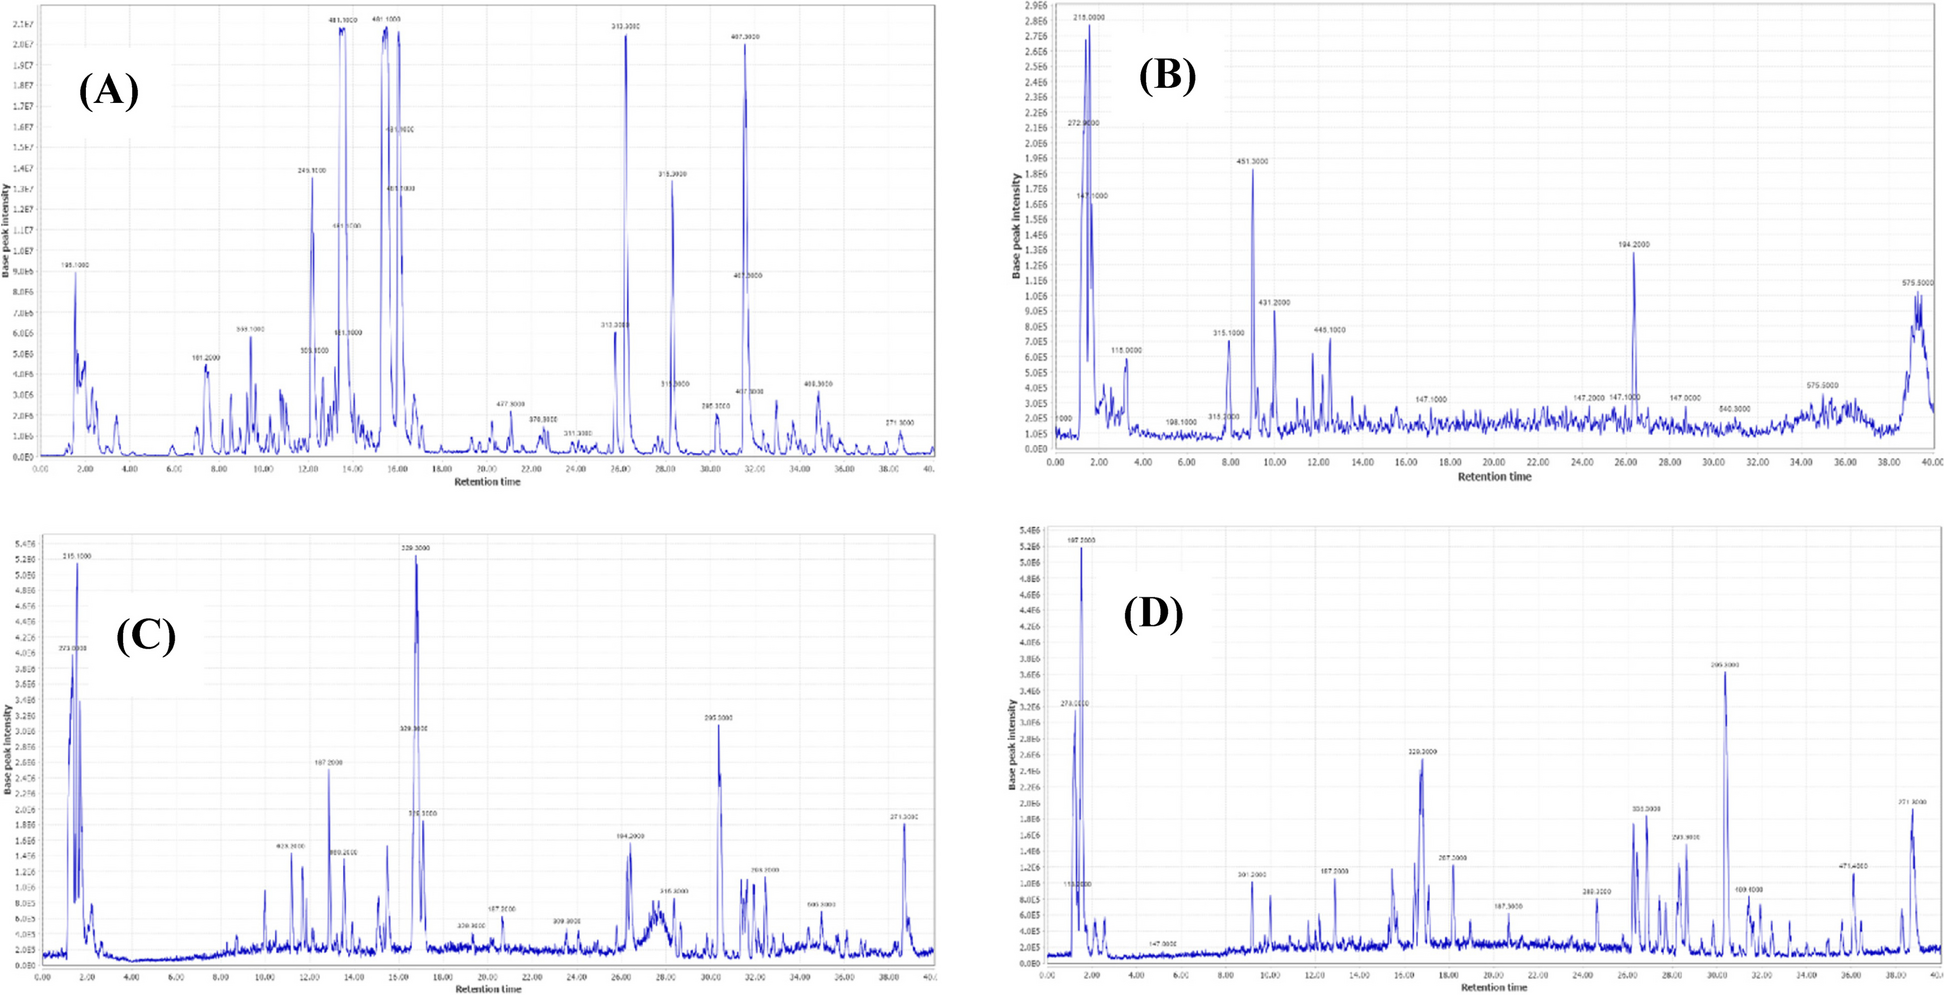 Metabolic profiling of milk thistle different organs using UPLC-TQD-MS/MS coupled to multivariate analysis in relation to their selective antiviral potential